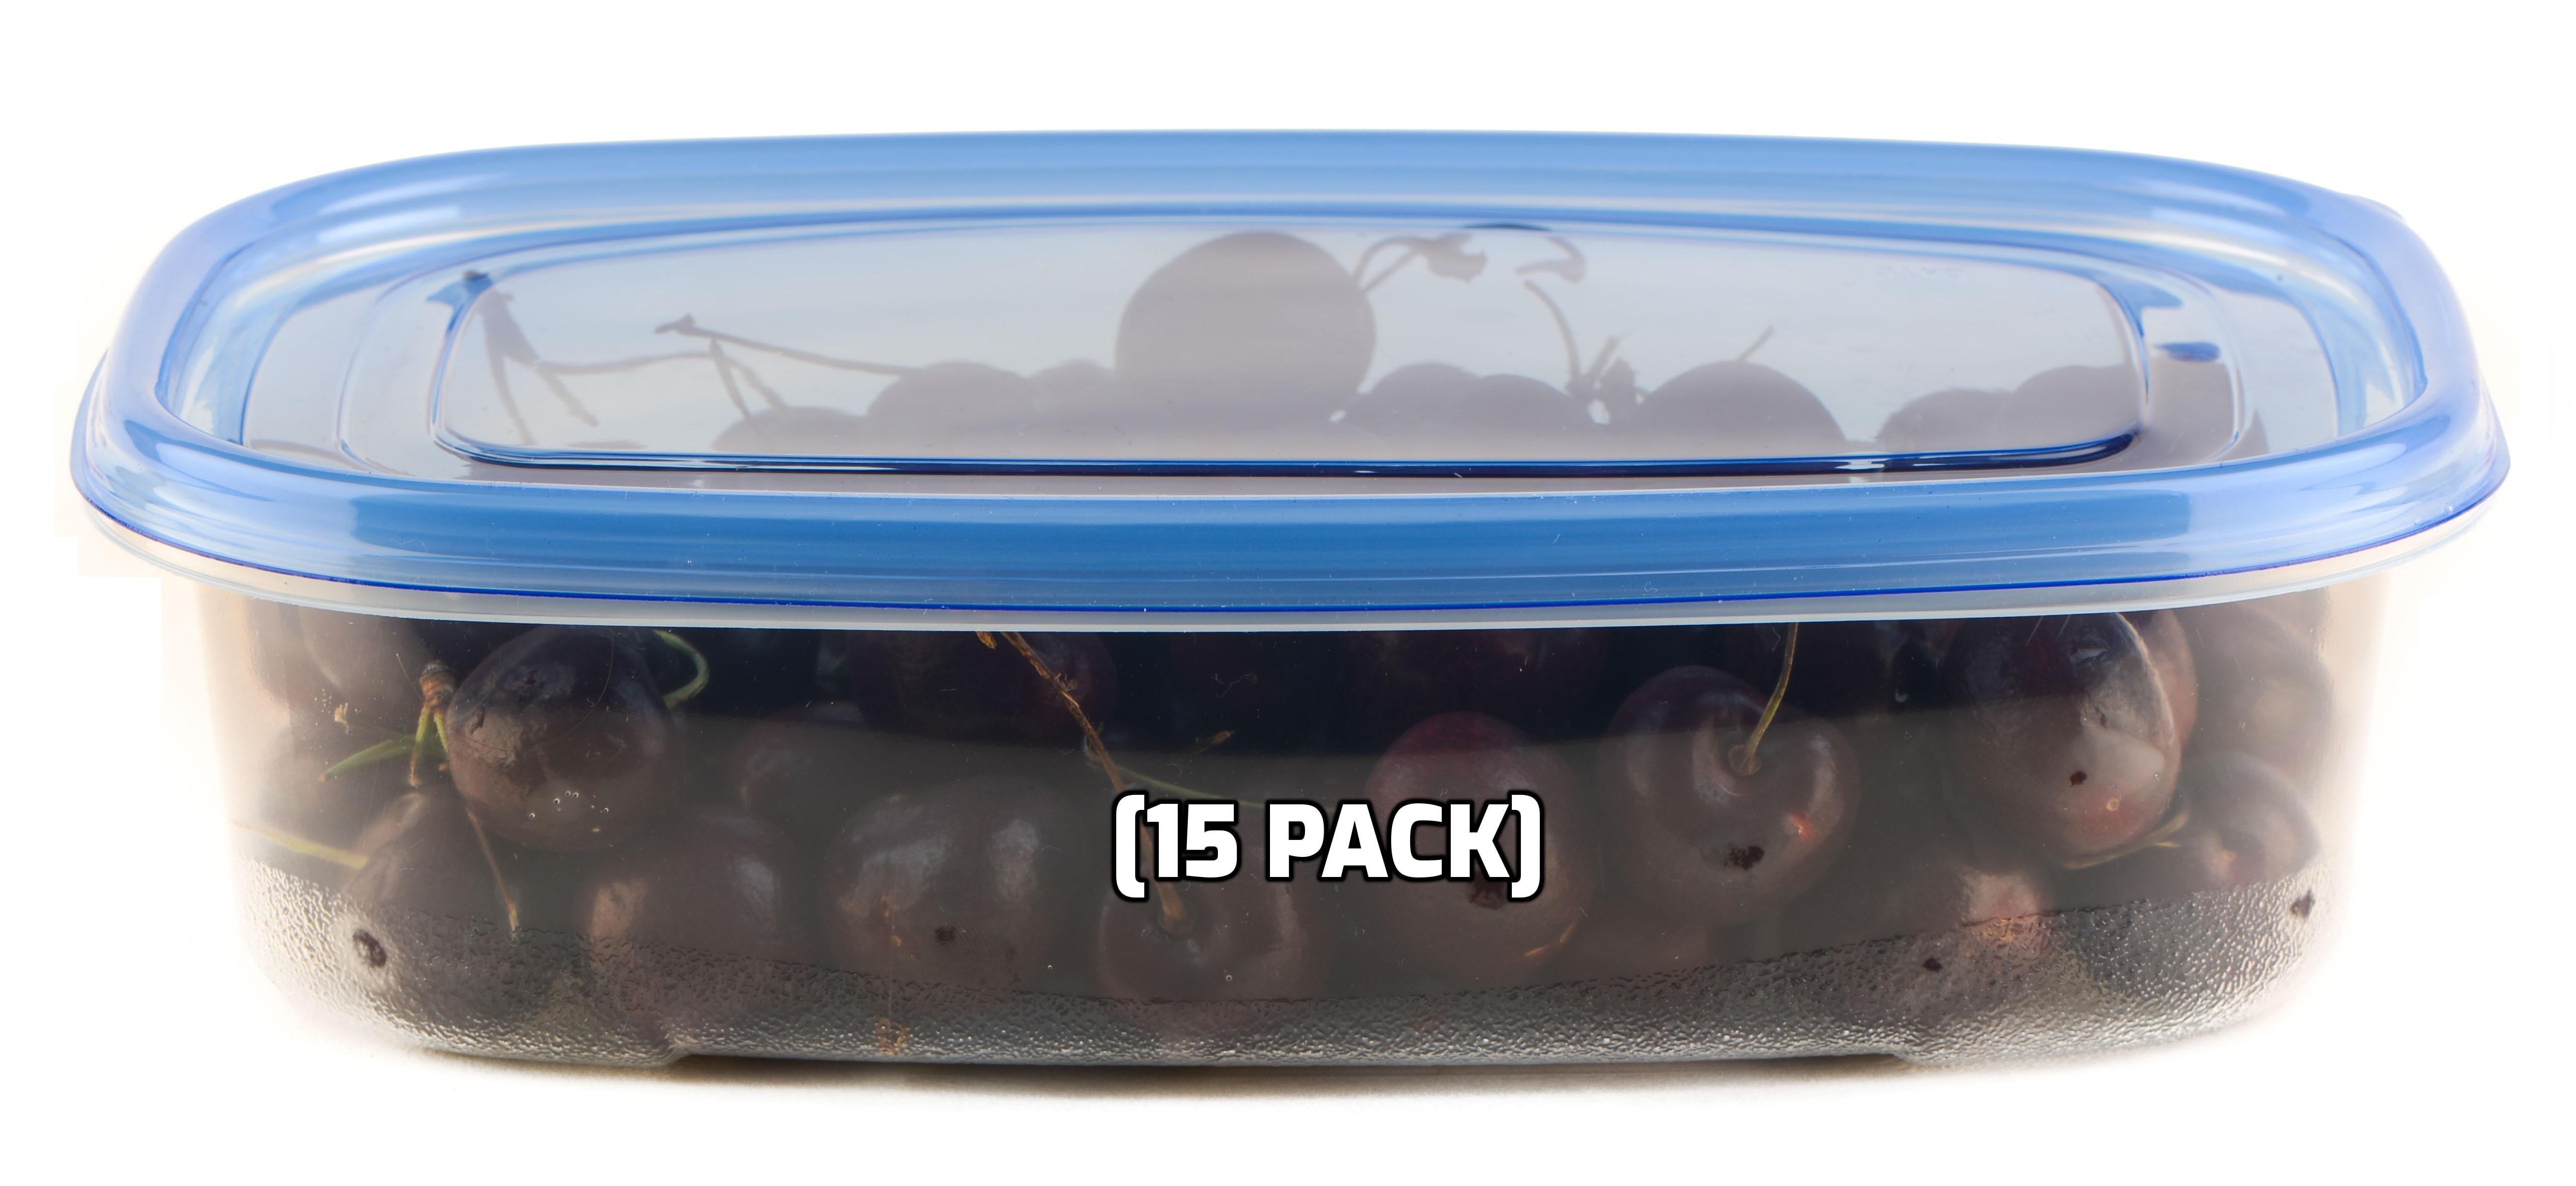 hölm BPA Free Reusable Square Food Storage Containers With Lids